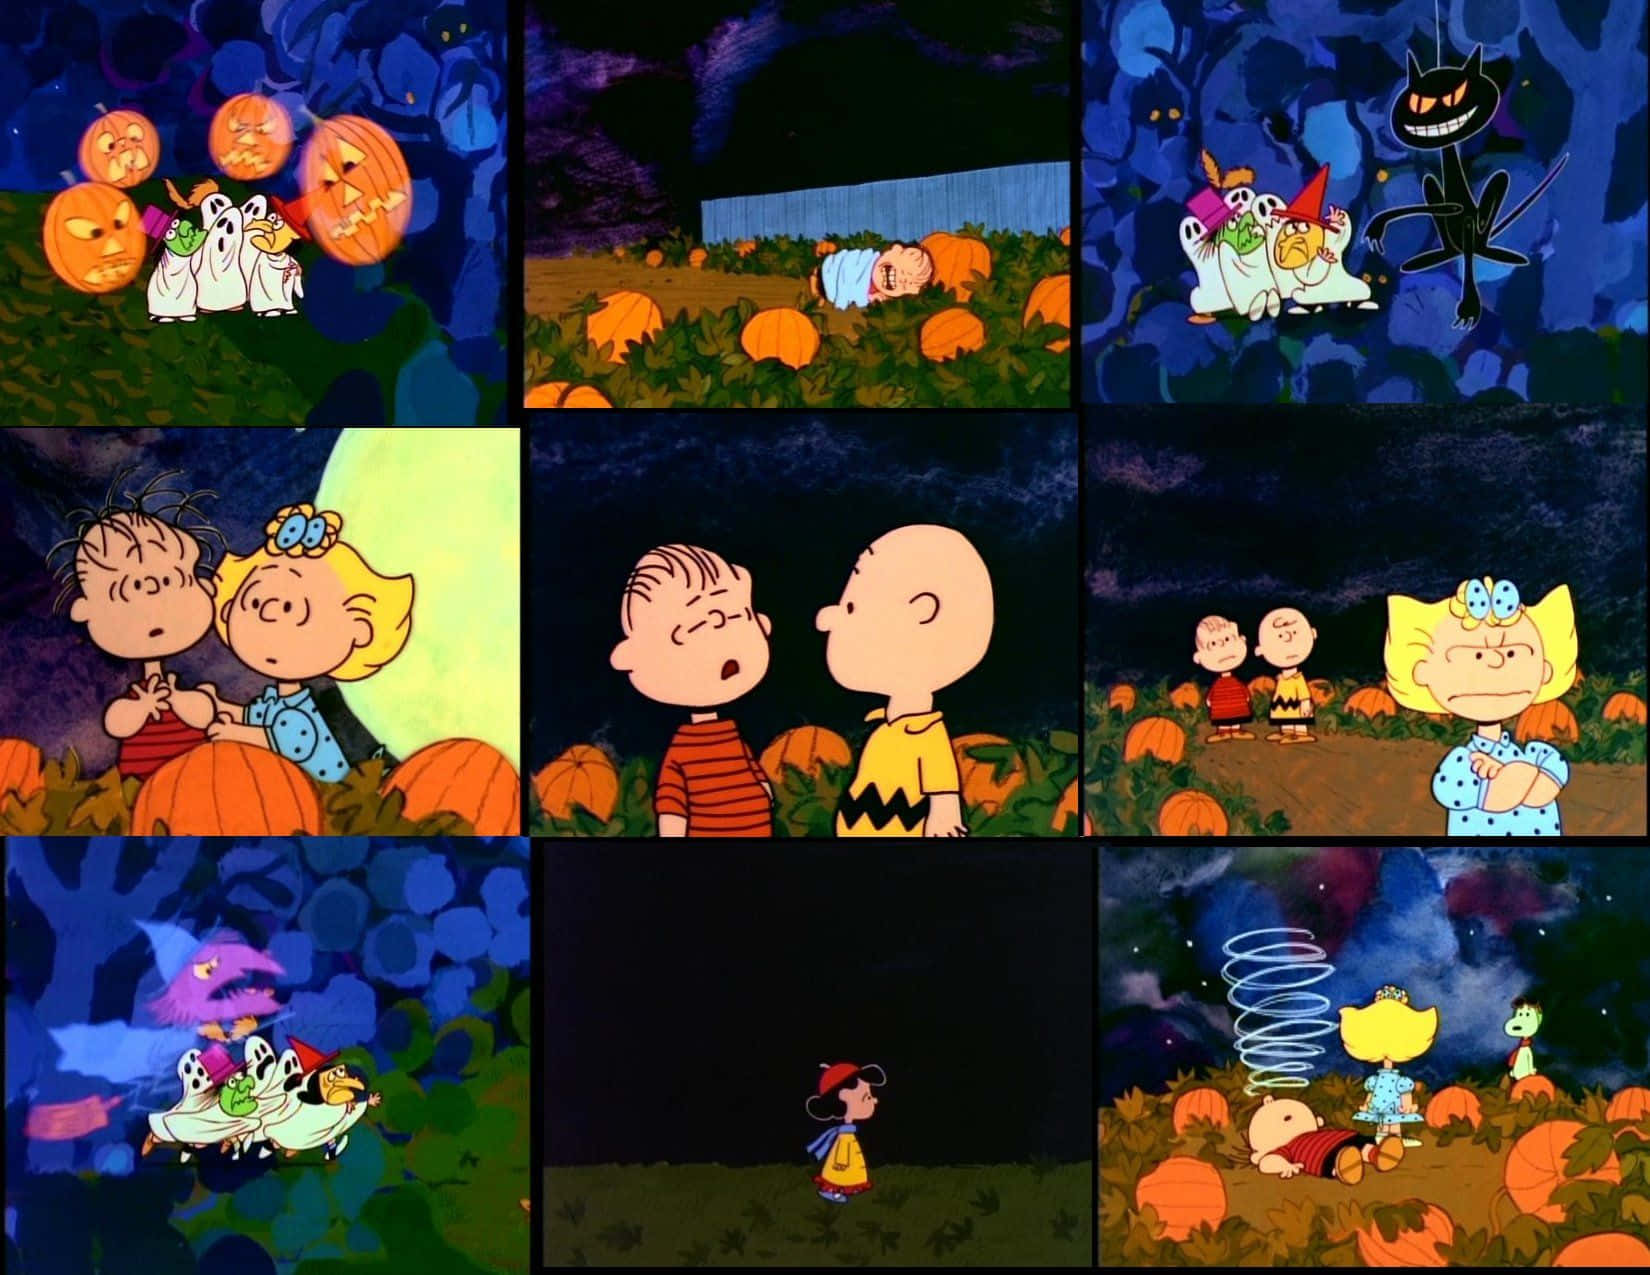 Celebrate Halloween with Charlie Brown, Snoopy and the gang. Wallpaper